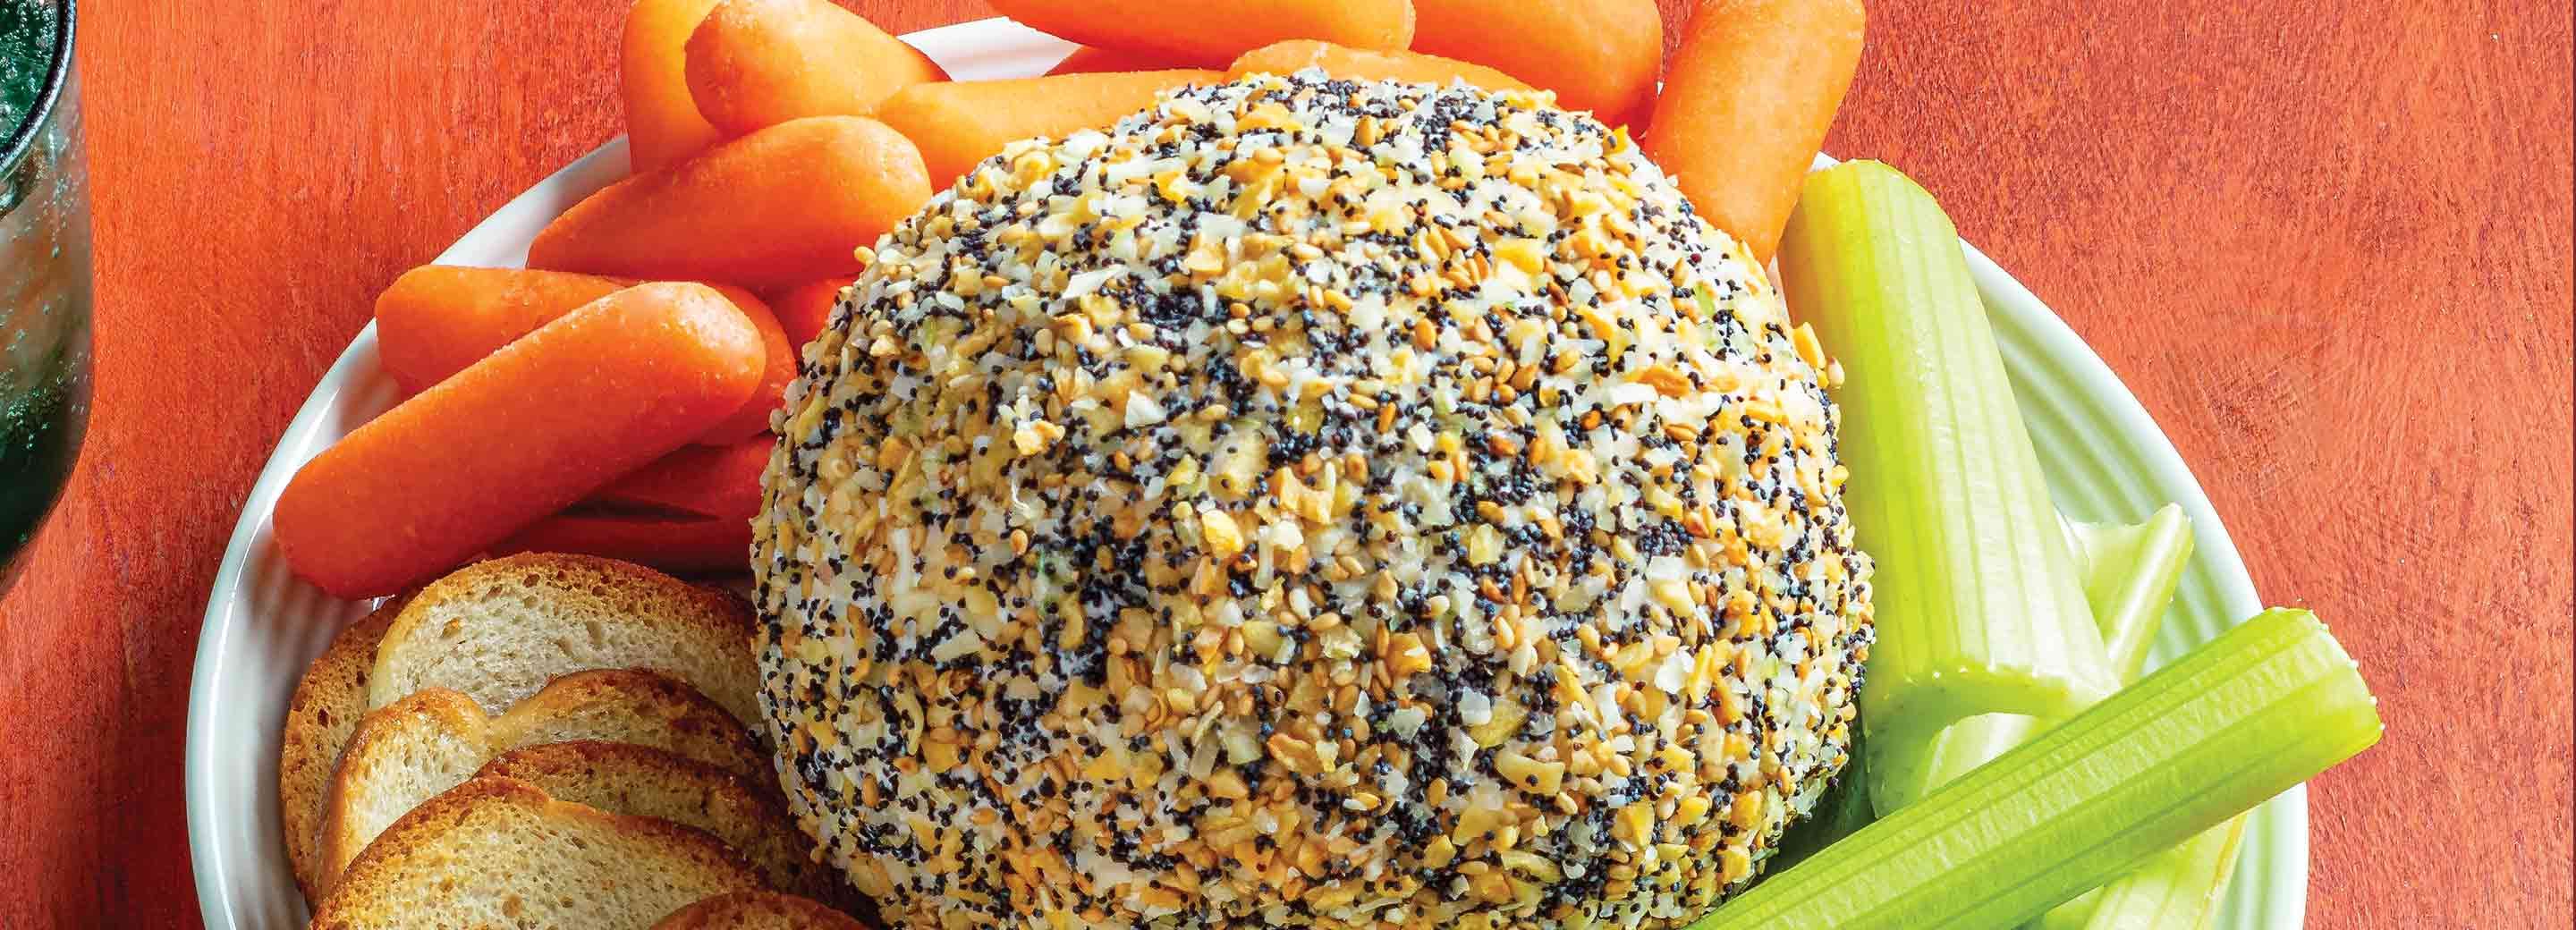 Everything Bagel Cheese Ball